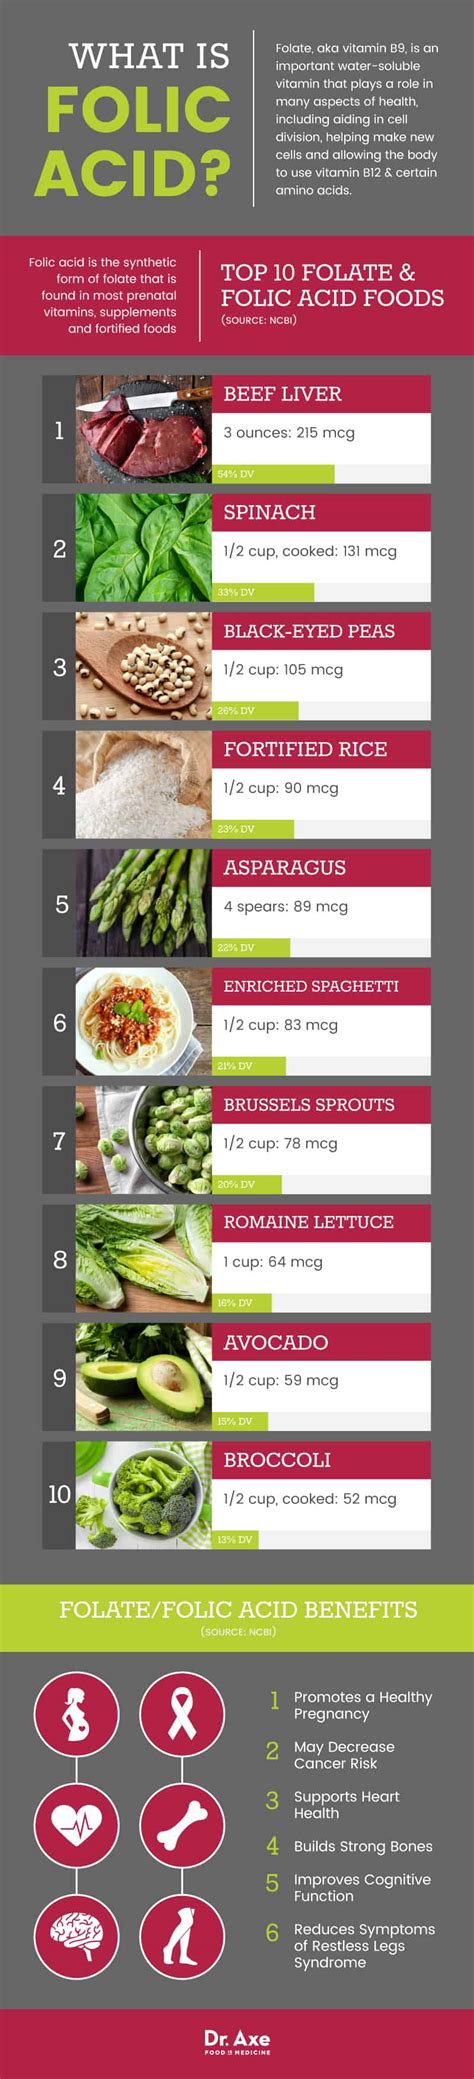 Top 10 Folic Acid Foods To Boost Folate Levels Dr Axe